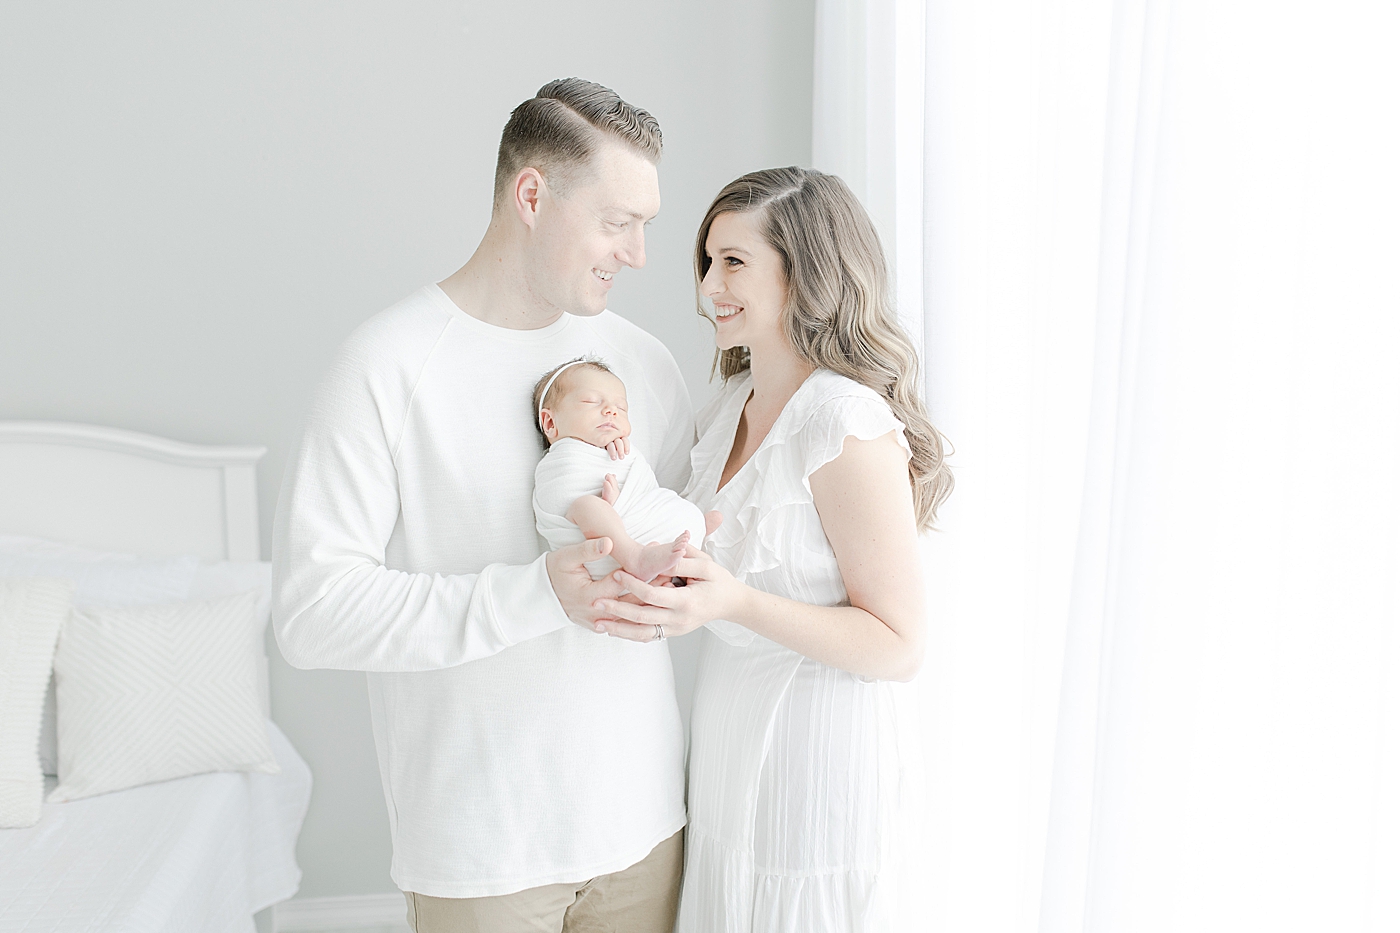 Mom and dad holding newborn baby girl | Photo by Little Sunshine Photography